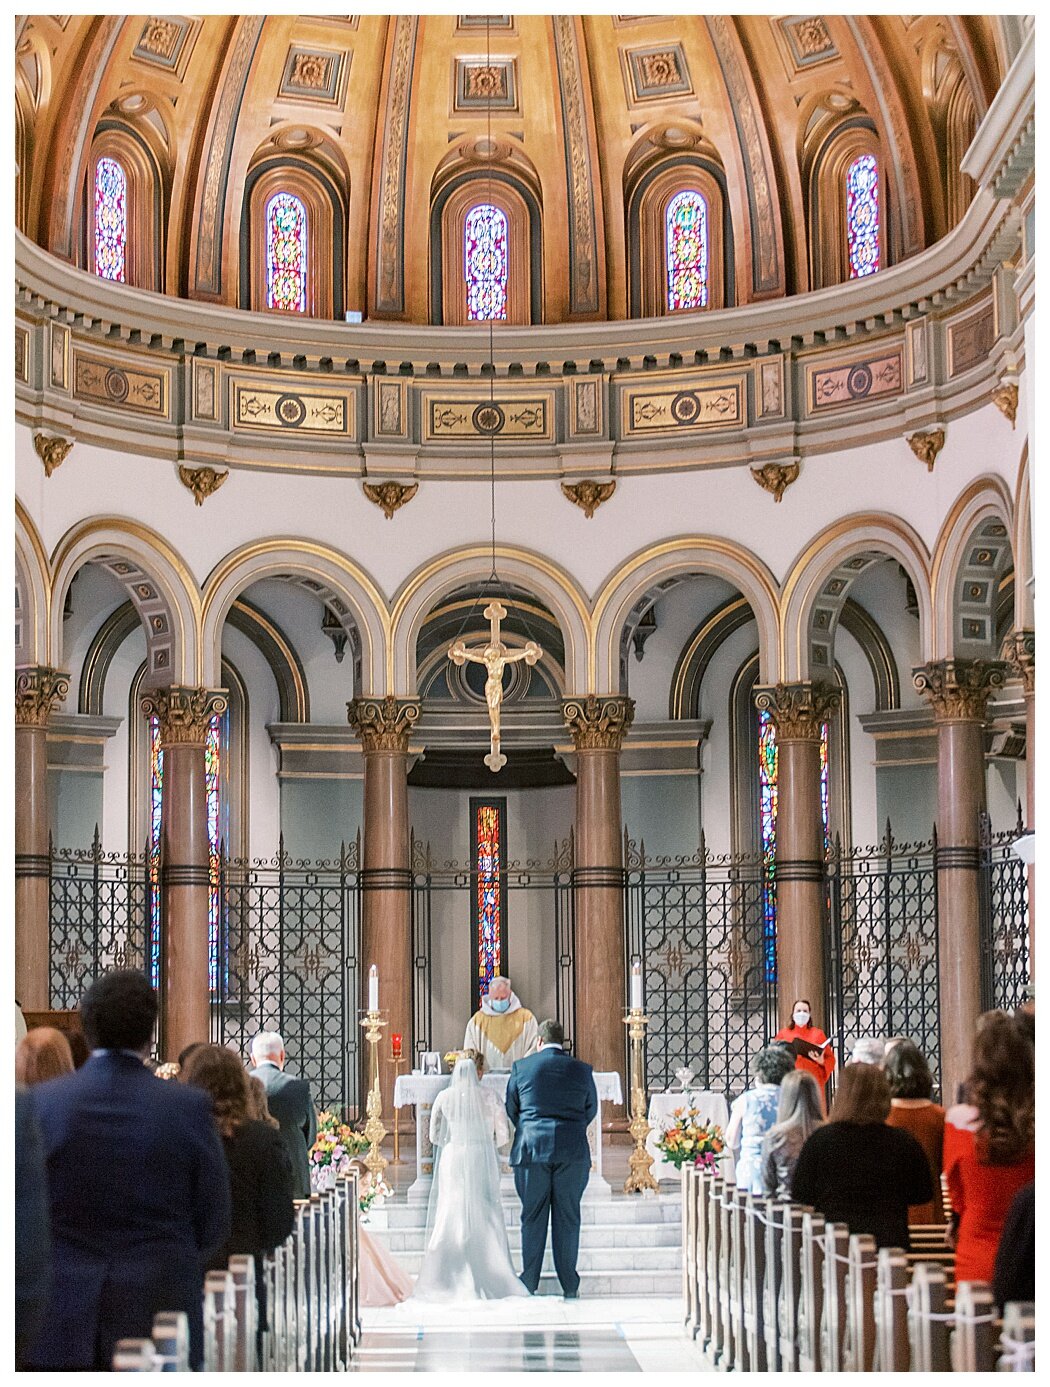 richmond-cathedral-of-sacred-heart-wedding-ceremony-1819.jpg